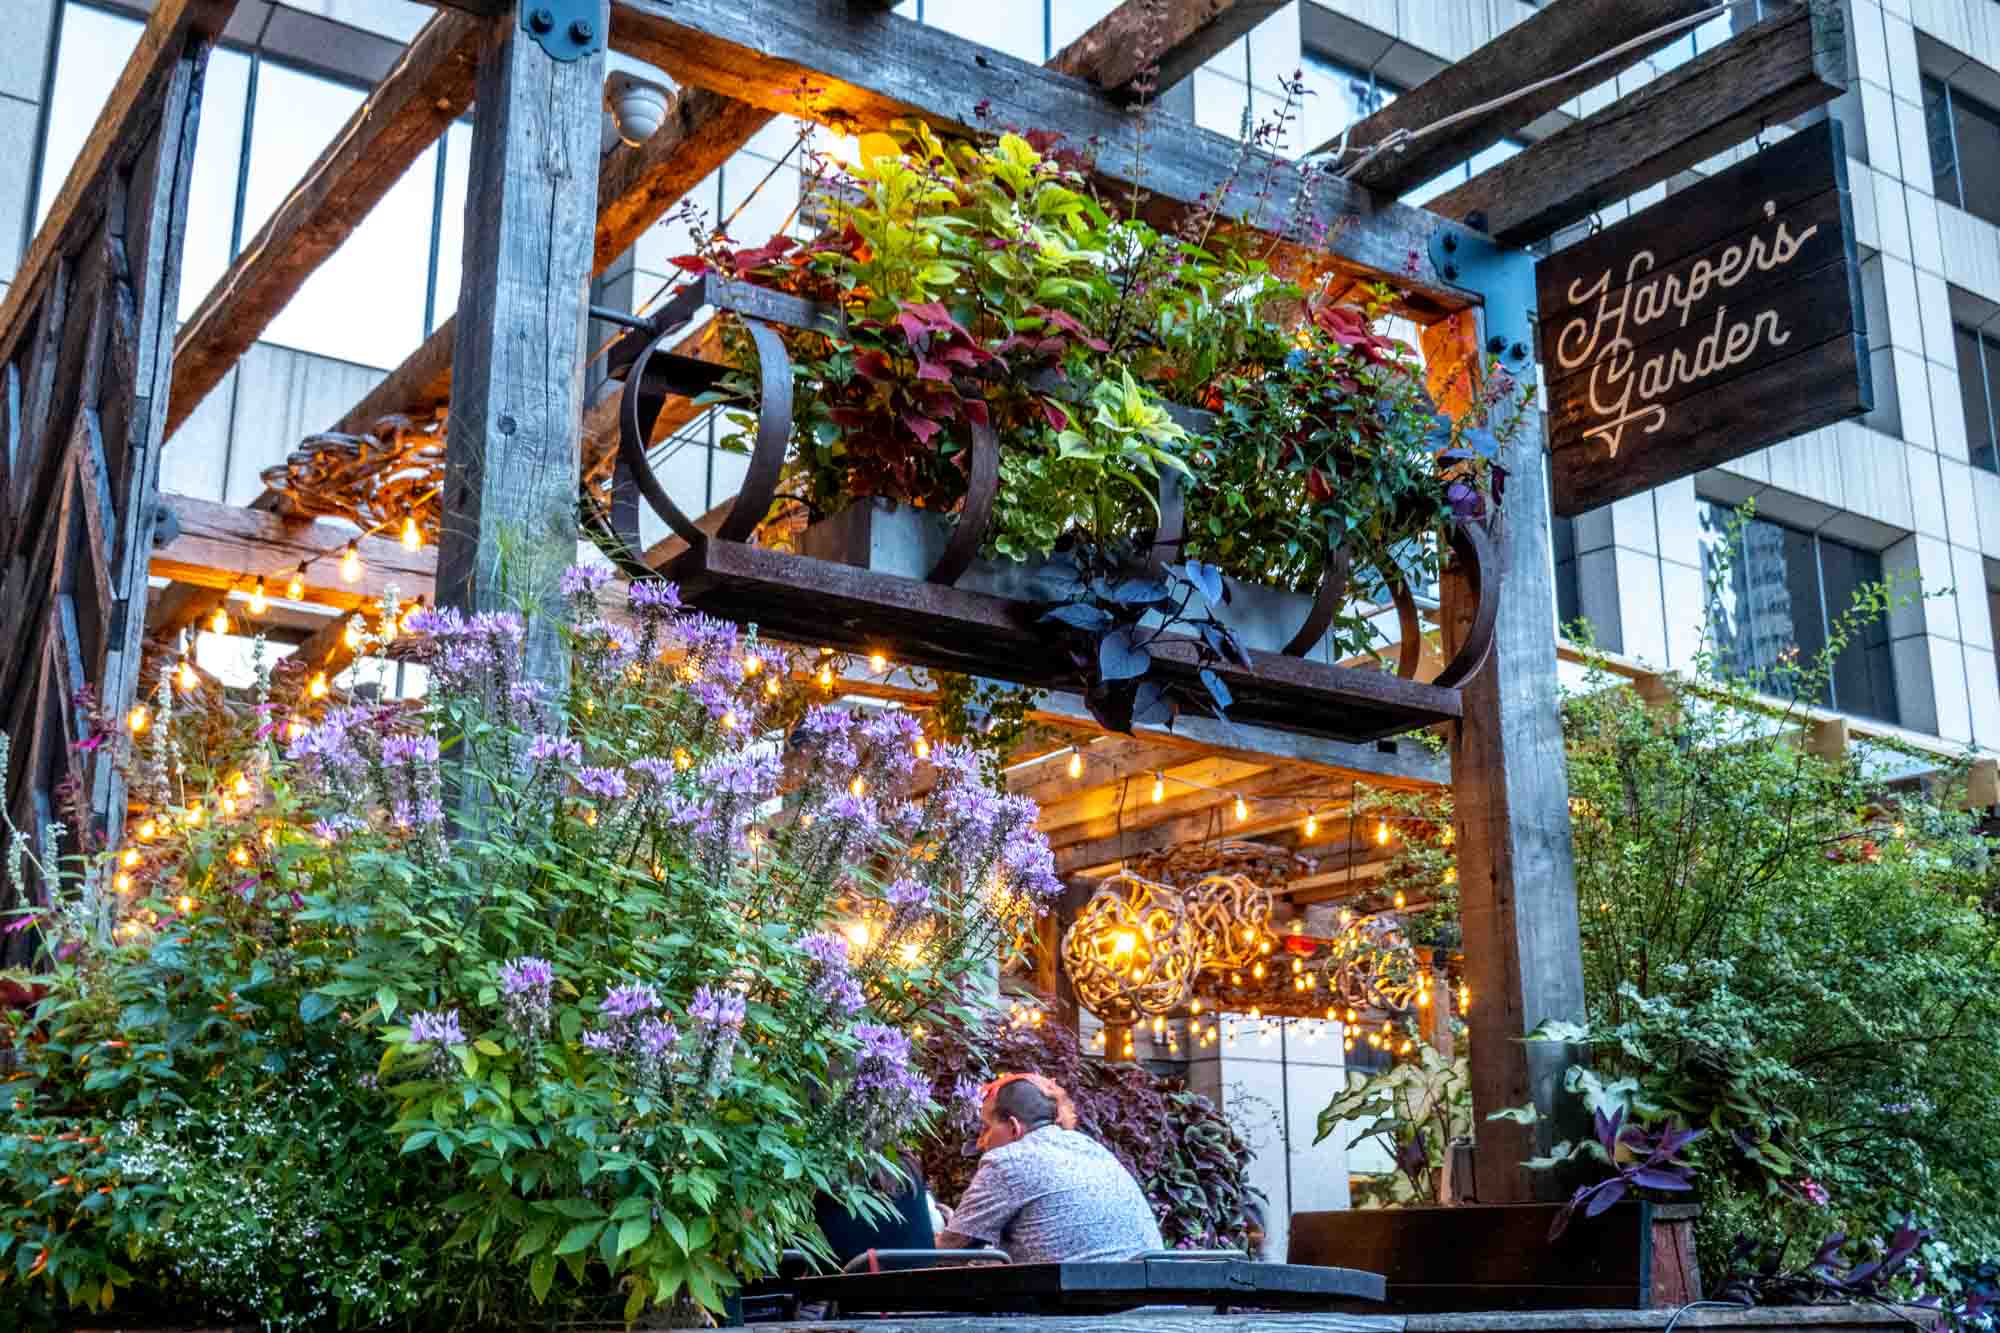 Restaurant patio filled with plants, flowers, and warm light fixtures and a sign for "Harper's Garden."